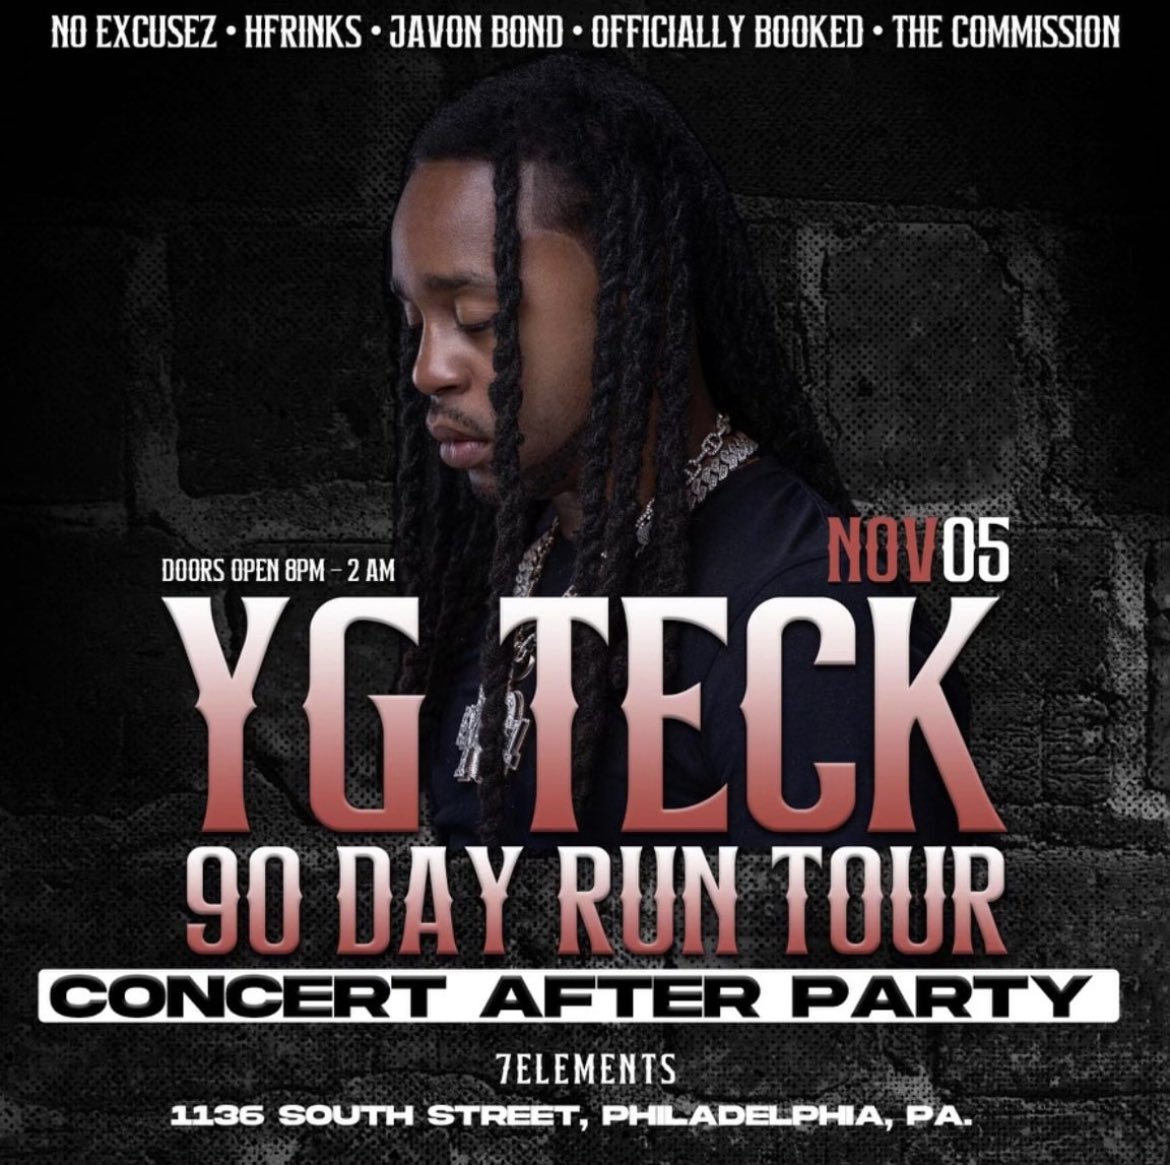 YG TECK Concert After Party At 7ELEMENTS..only place to b after tha concert🚀